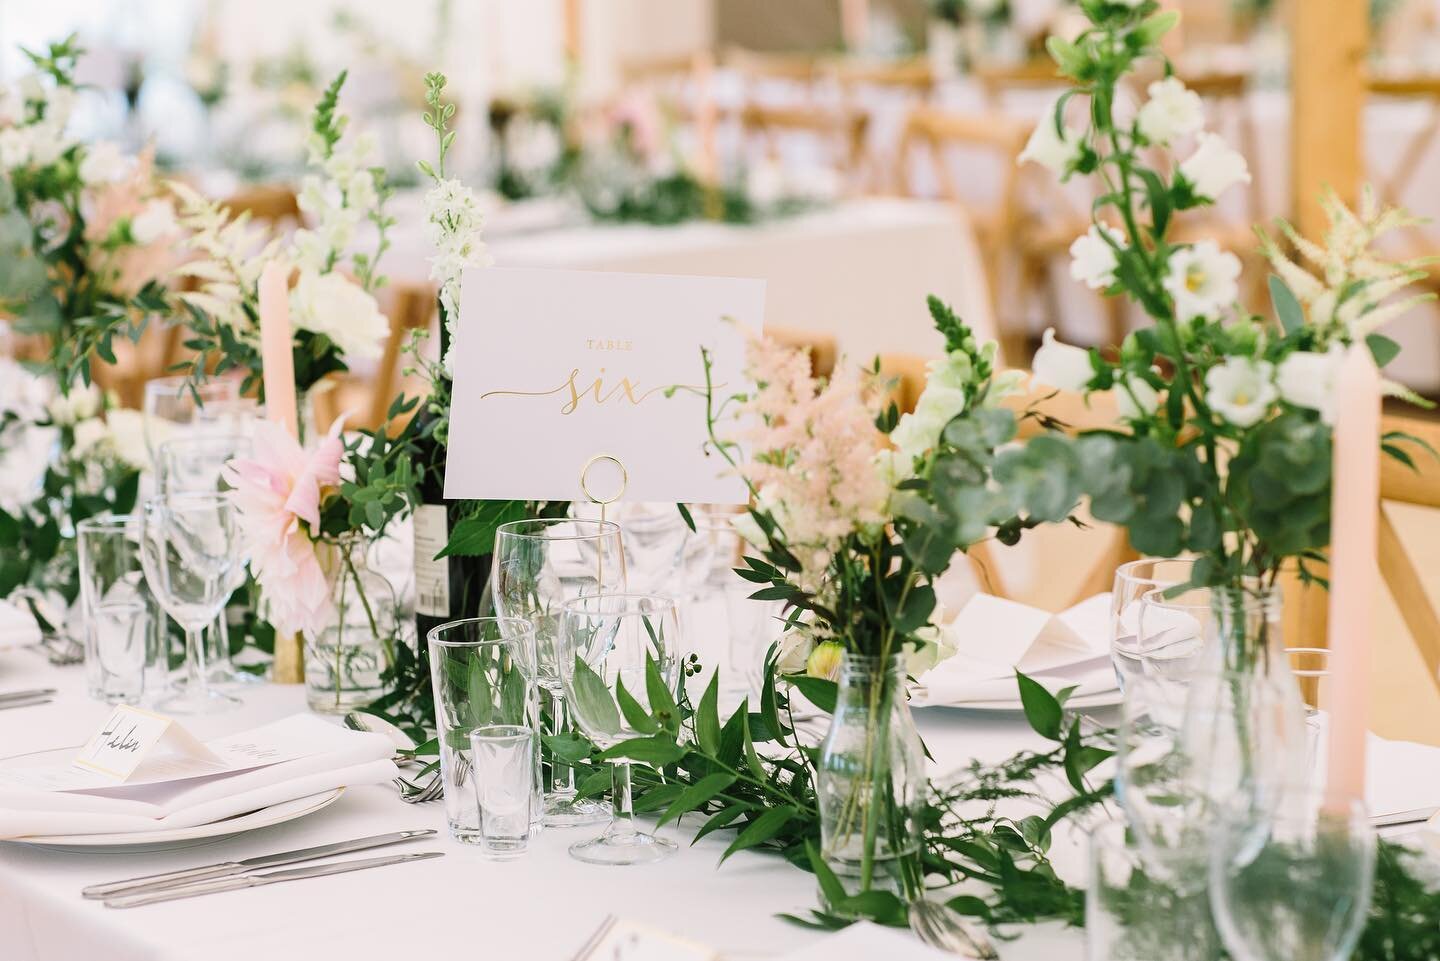 🌿Table centres🌿

A combination of bud vases and flowing foliage in a soft, romantic colour palette creating stunning table centres for a summer wedding. It&rsquo;s all in the details. We work closely with florists to bring to bring a vision to life